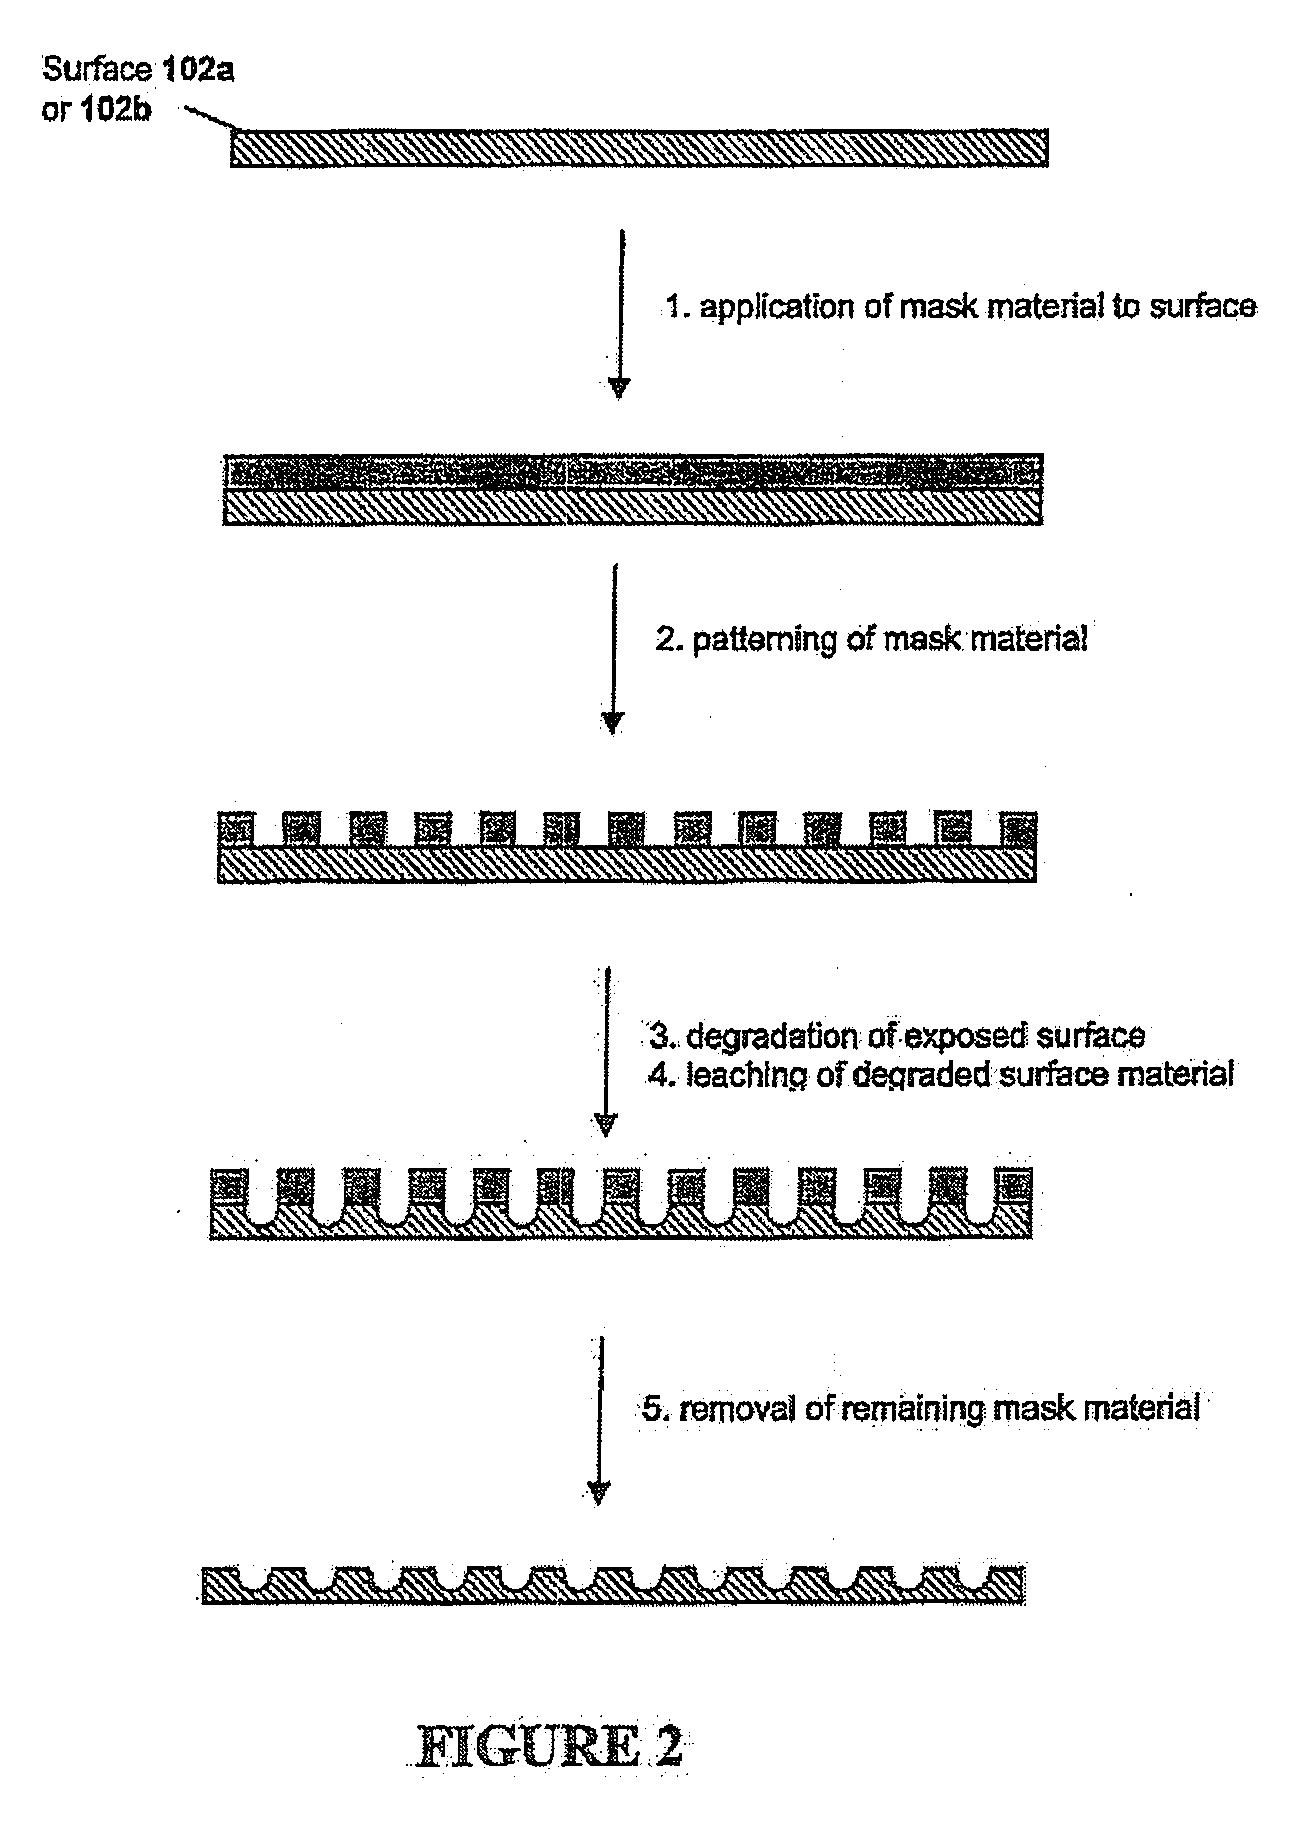 Implantable article, method of forming same and method for reducing thrombogenicity